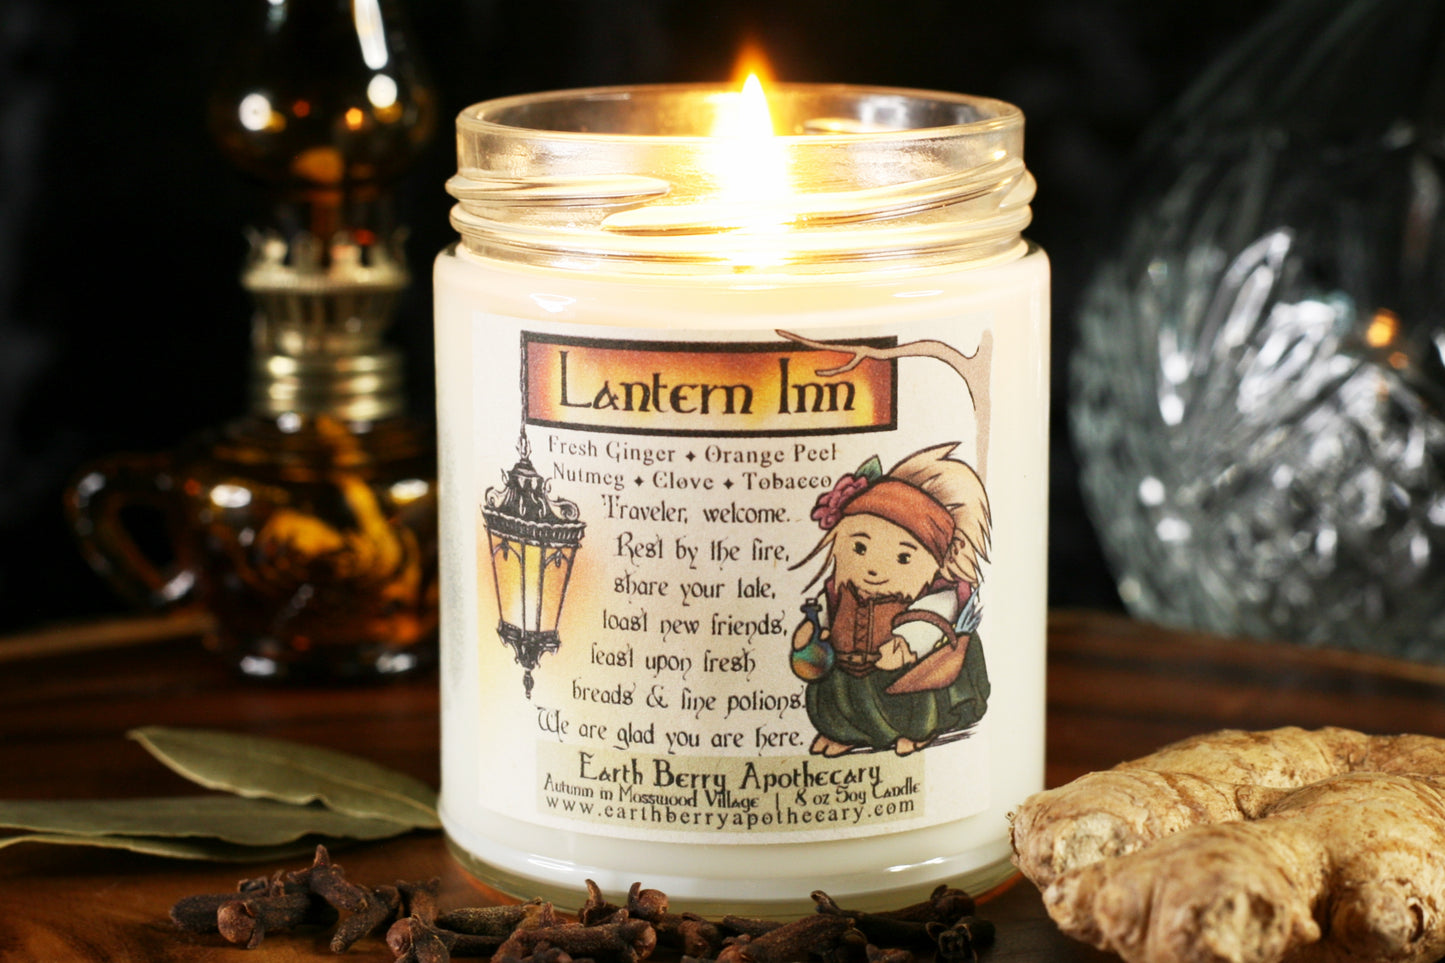 Lantern inn candle has a glowing old lantern and a hedgehog carrying a basket filled with vegetables, and a magical flask in the other hand. The scent is ginger, orange peel, clove, nutmeg, and tobacco